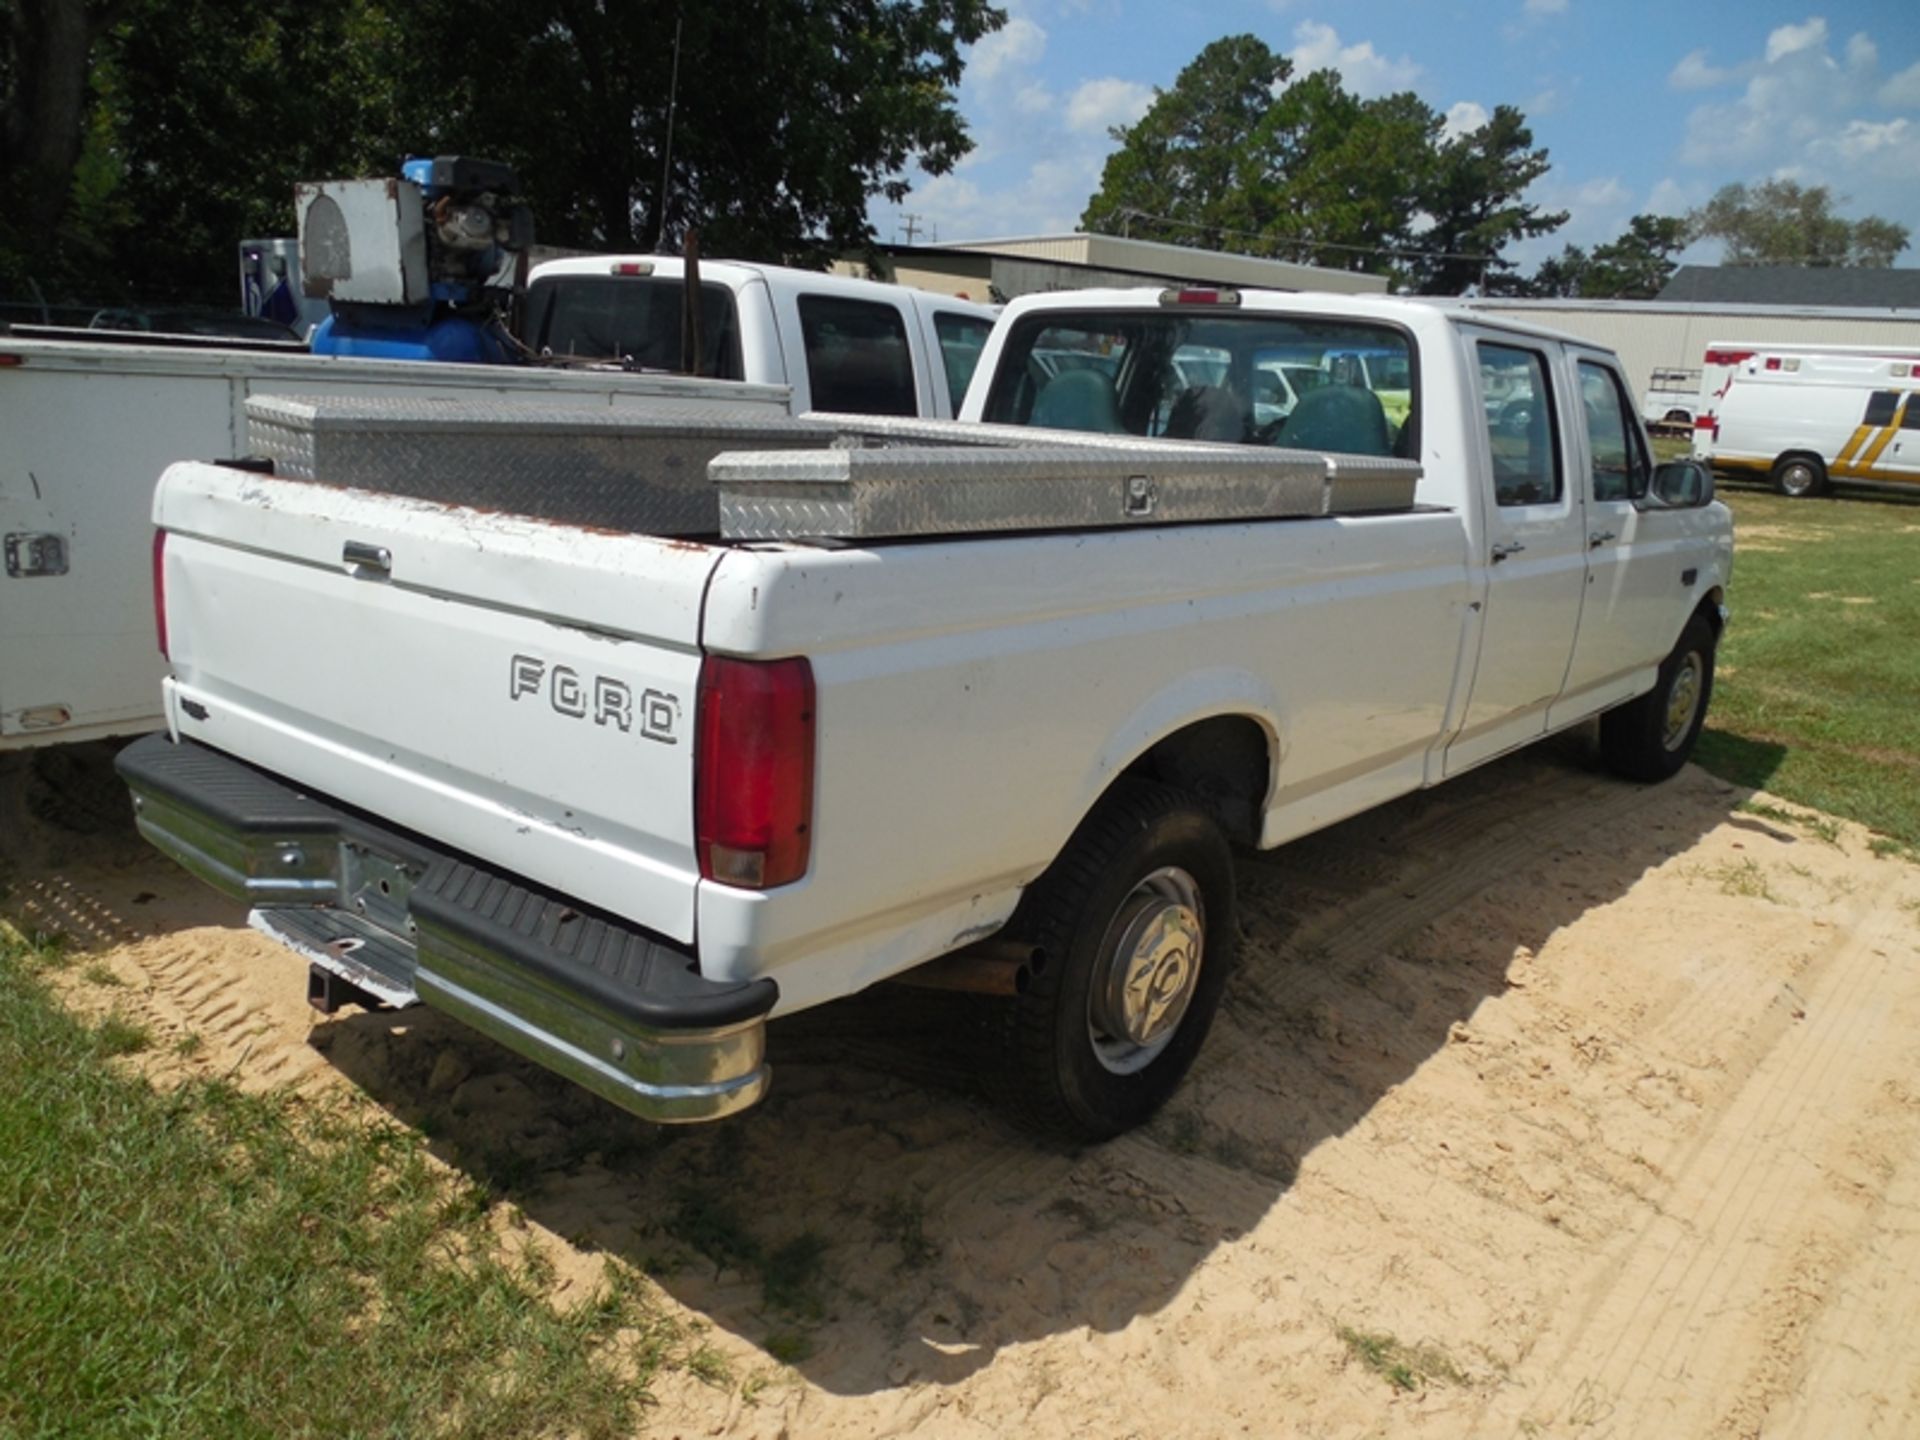 1996 Ford F350 4 dr vin# 1FTJW35HXTEB11228 mileage unknown - Image 3 of 5